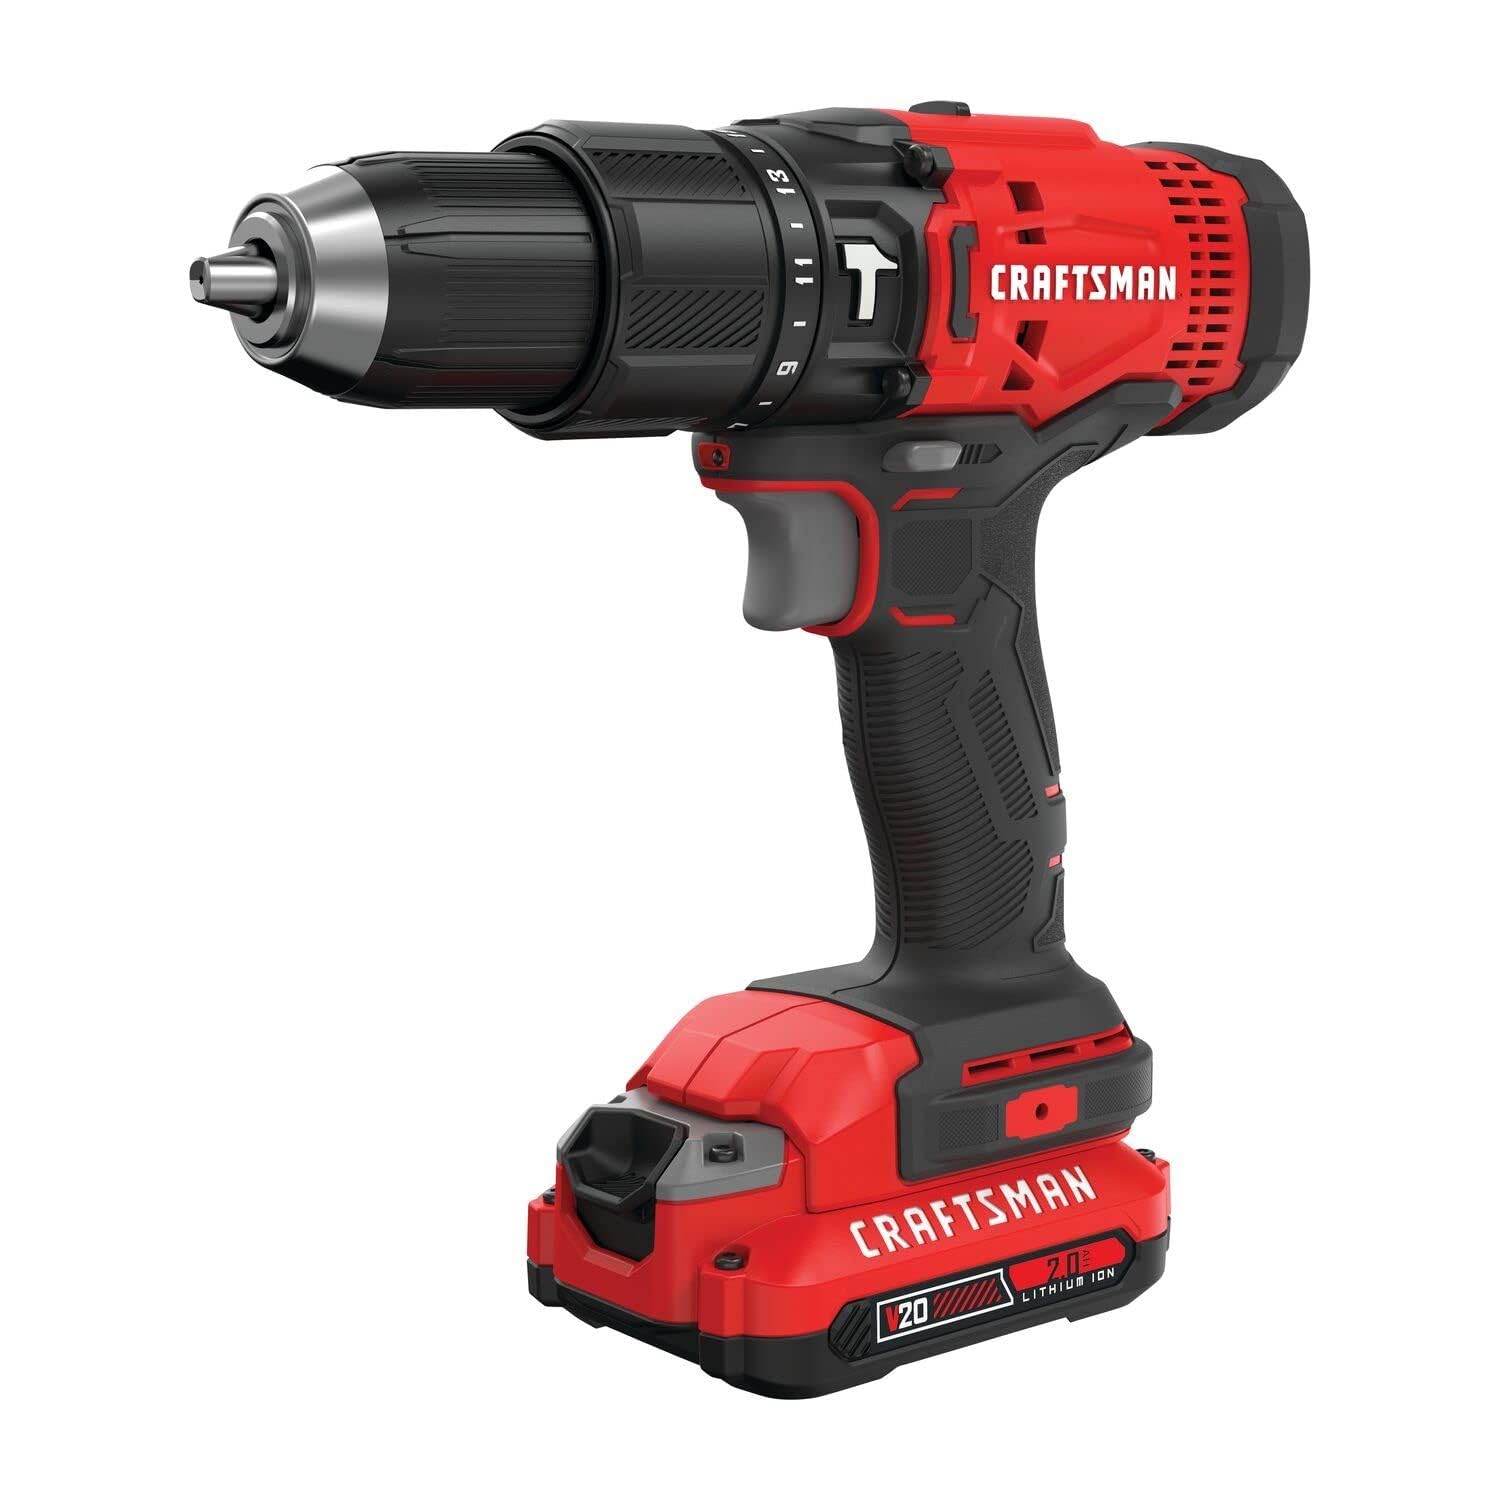 CRAFTSMAN V20 Cordless Hammer Drill, 1/2 inch, Battery & Charger Included (CMCD711D1)